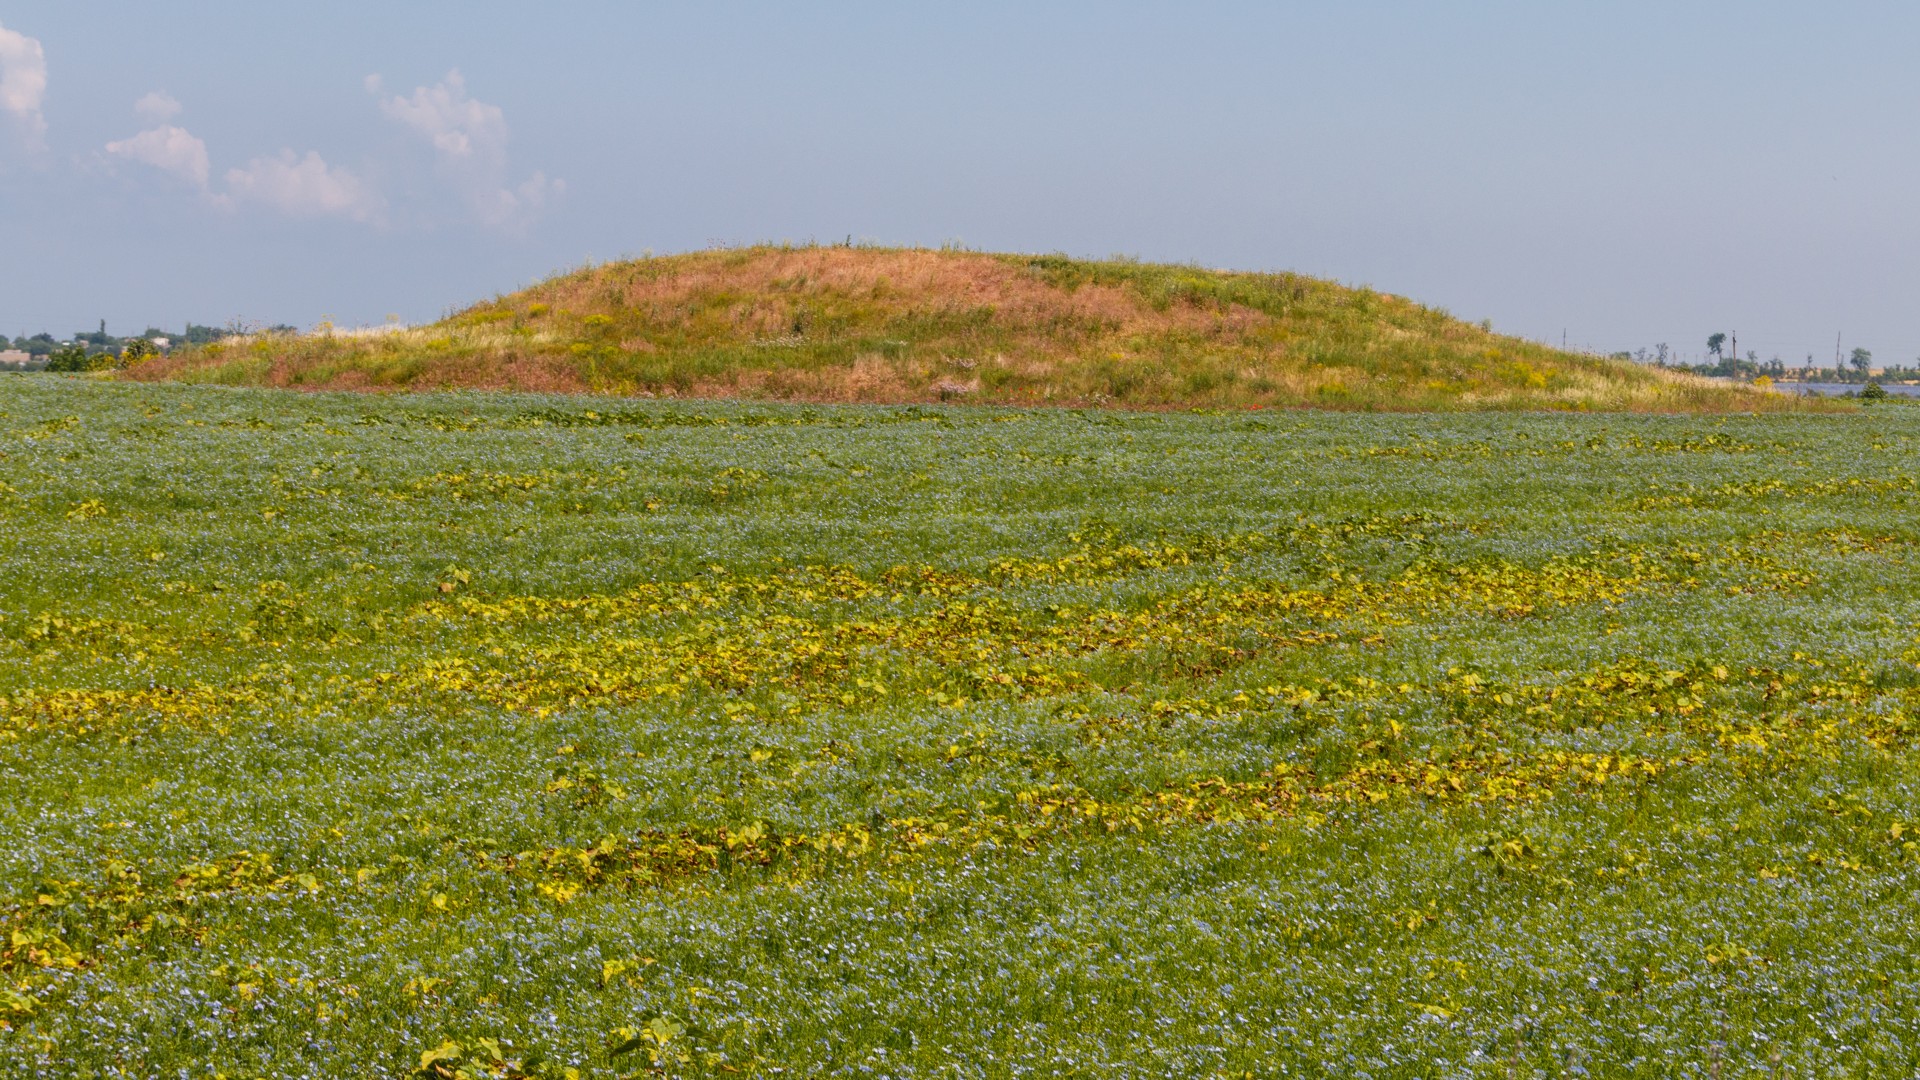 Scythian burial mound in a grassy field dotted with yellow flowers in the south of Ukraine.